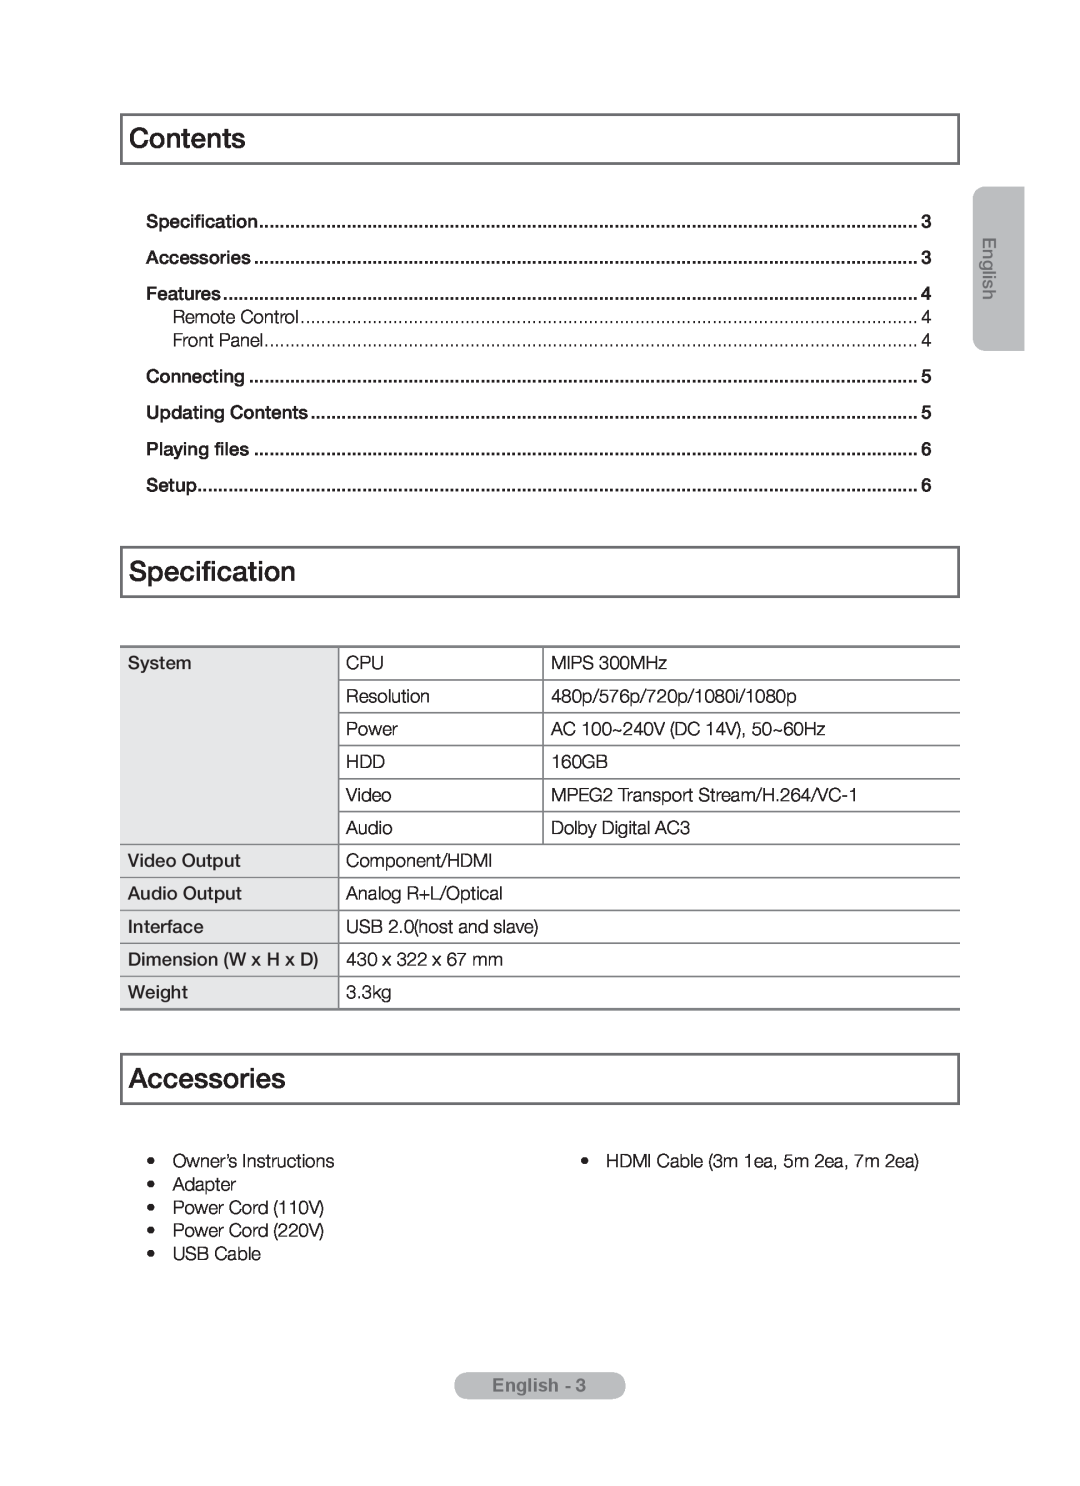 Samsung MR-16SB2 manual Contents, Specification, Accessories, English 